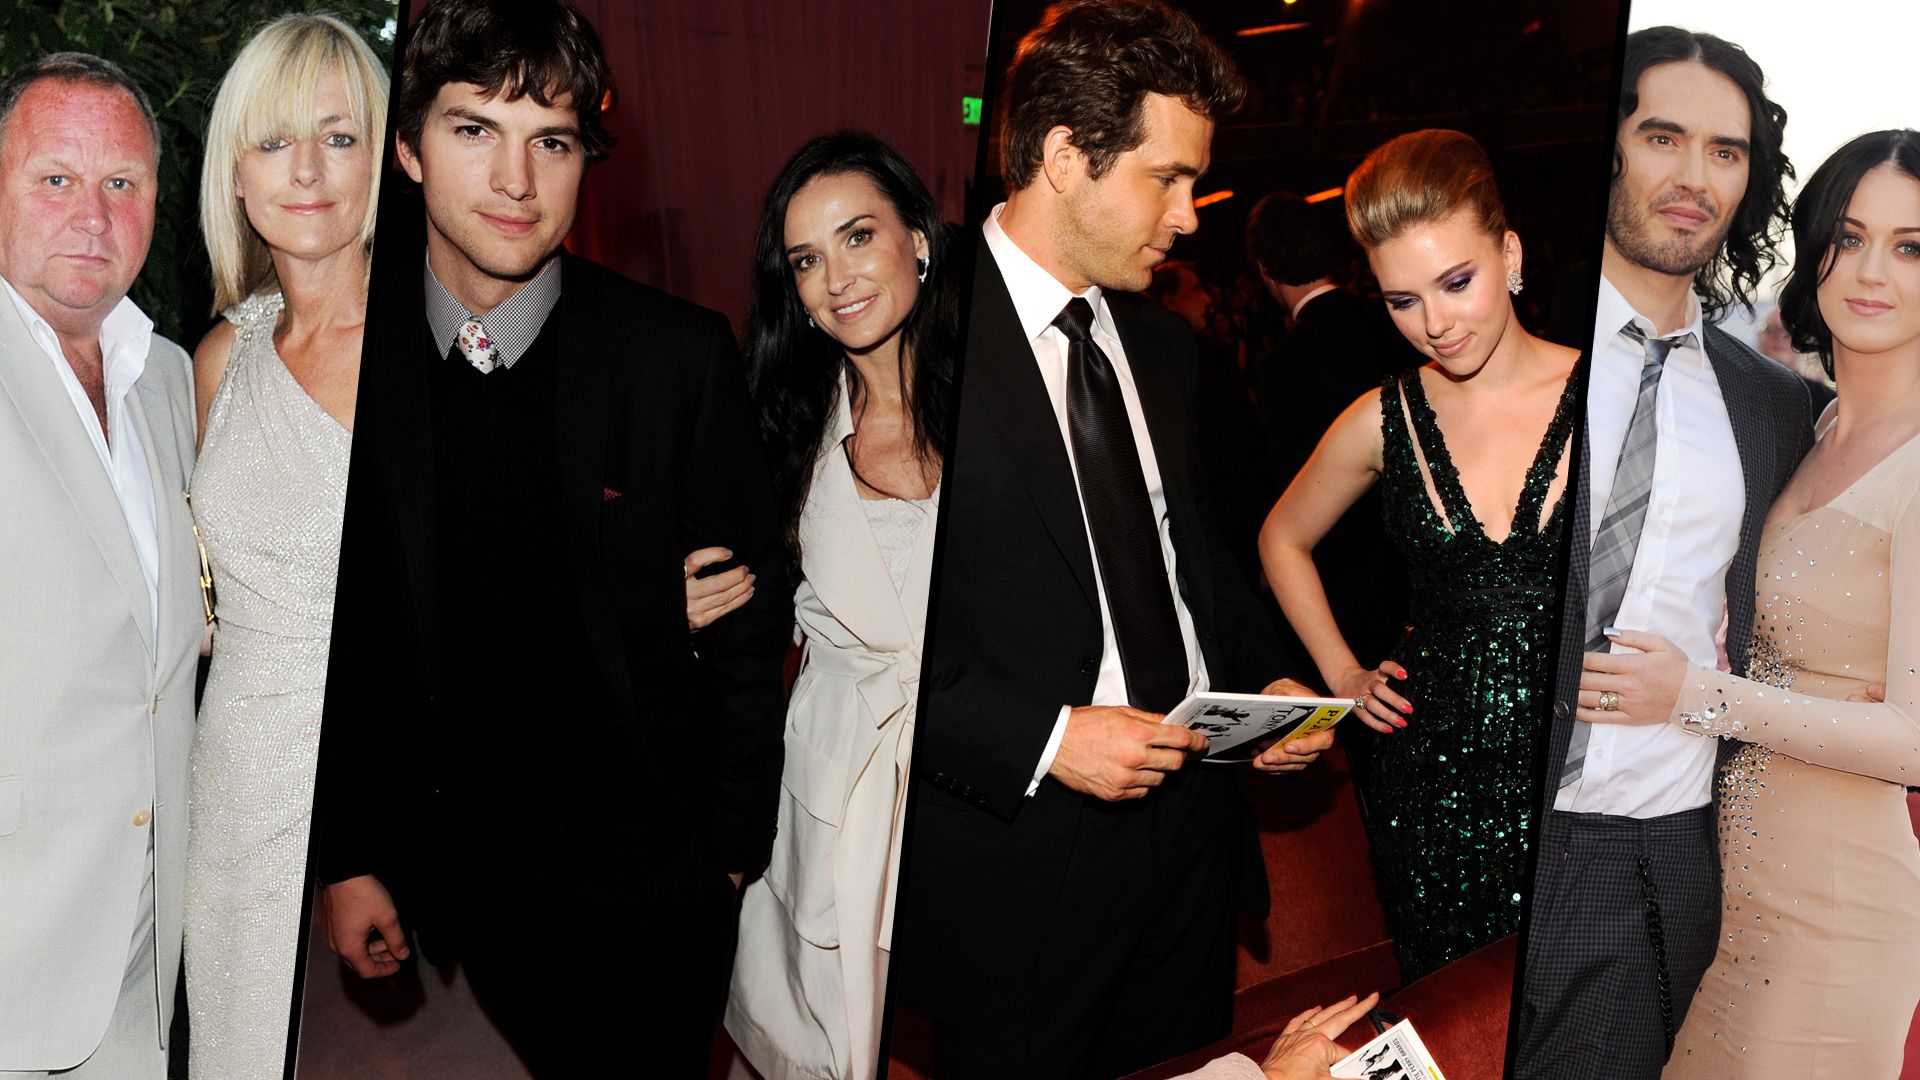 Jane Moore, Ashton Kutcher, Ryan Reynolds and Katy Perry with their ex-partners